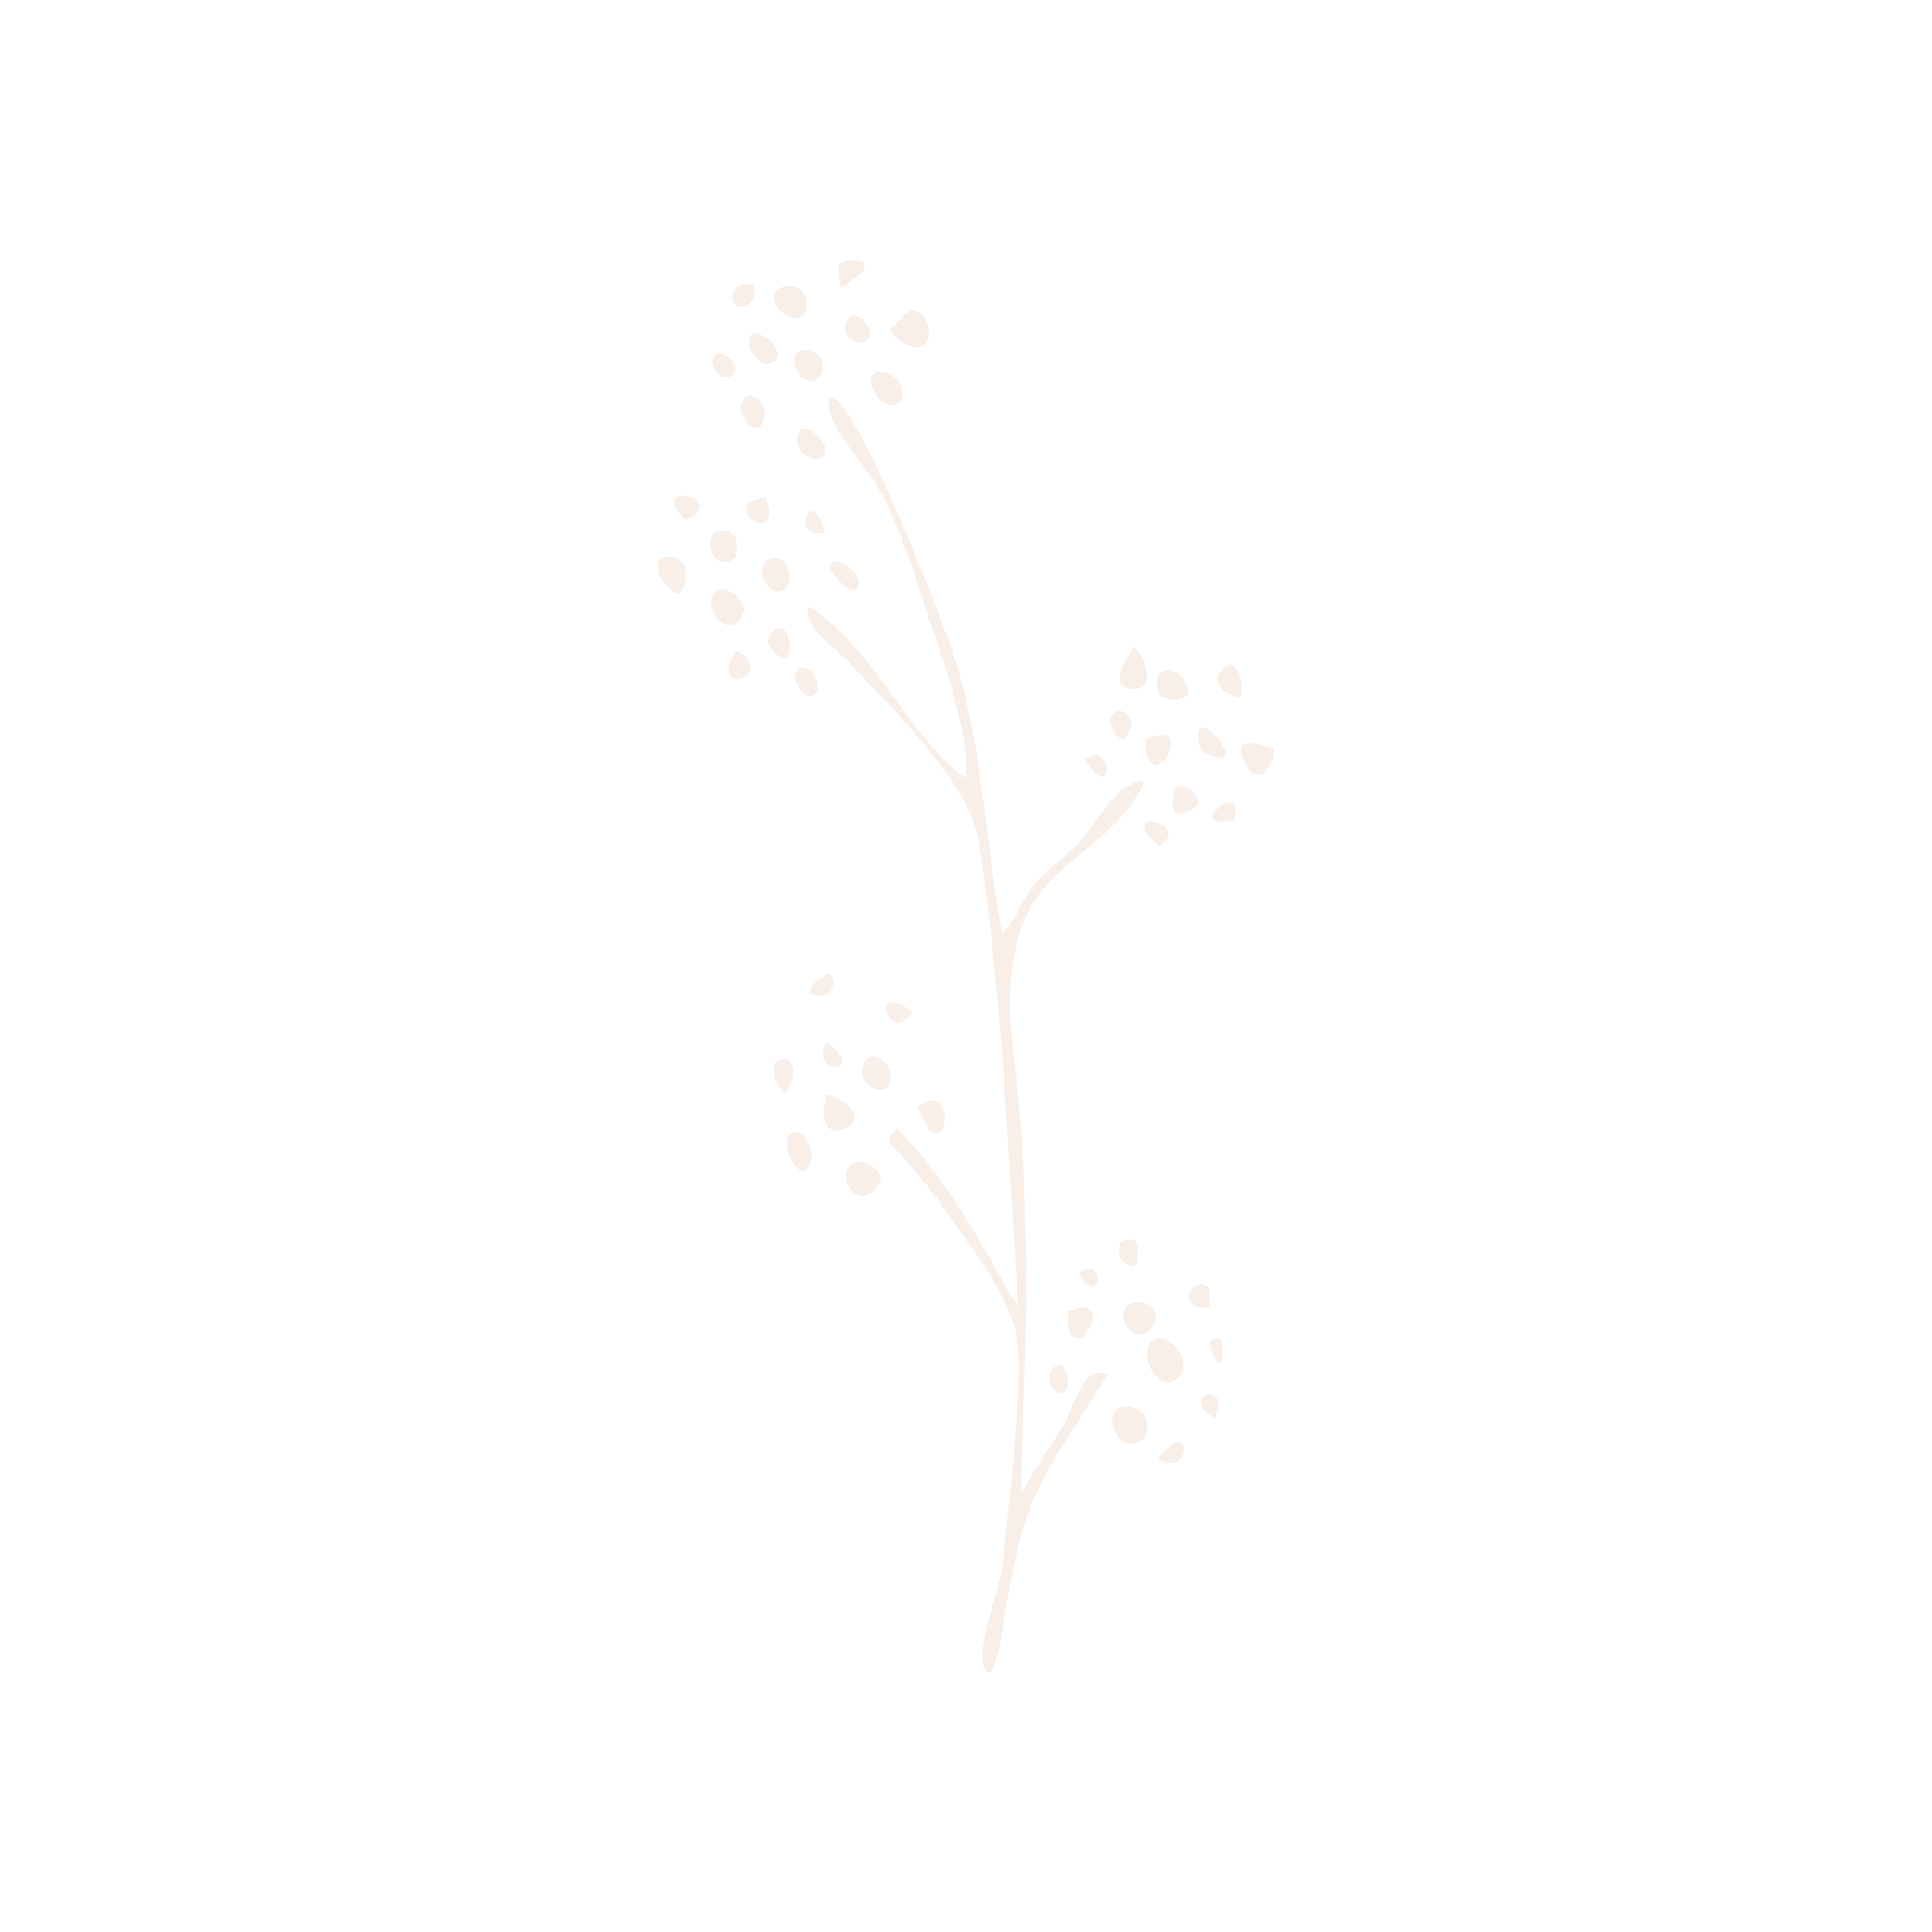 hand-drawn floral